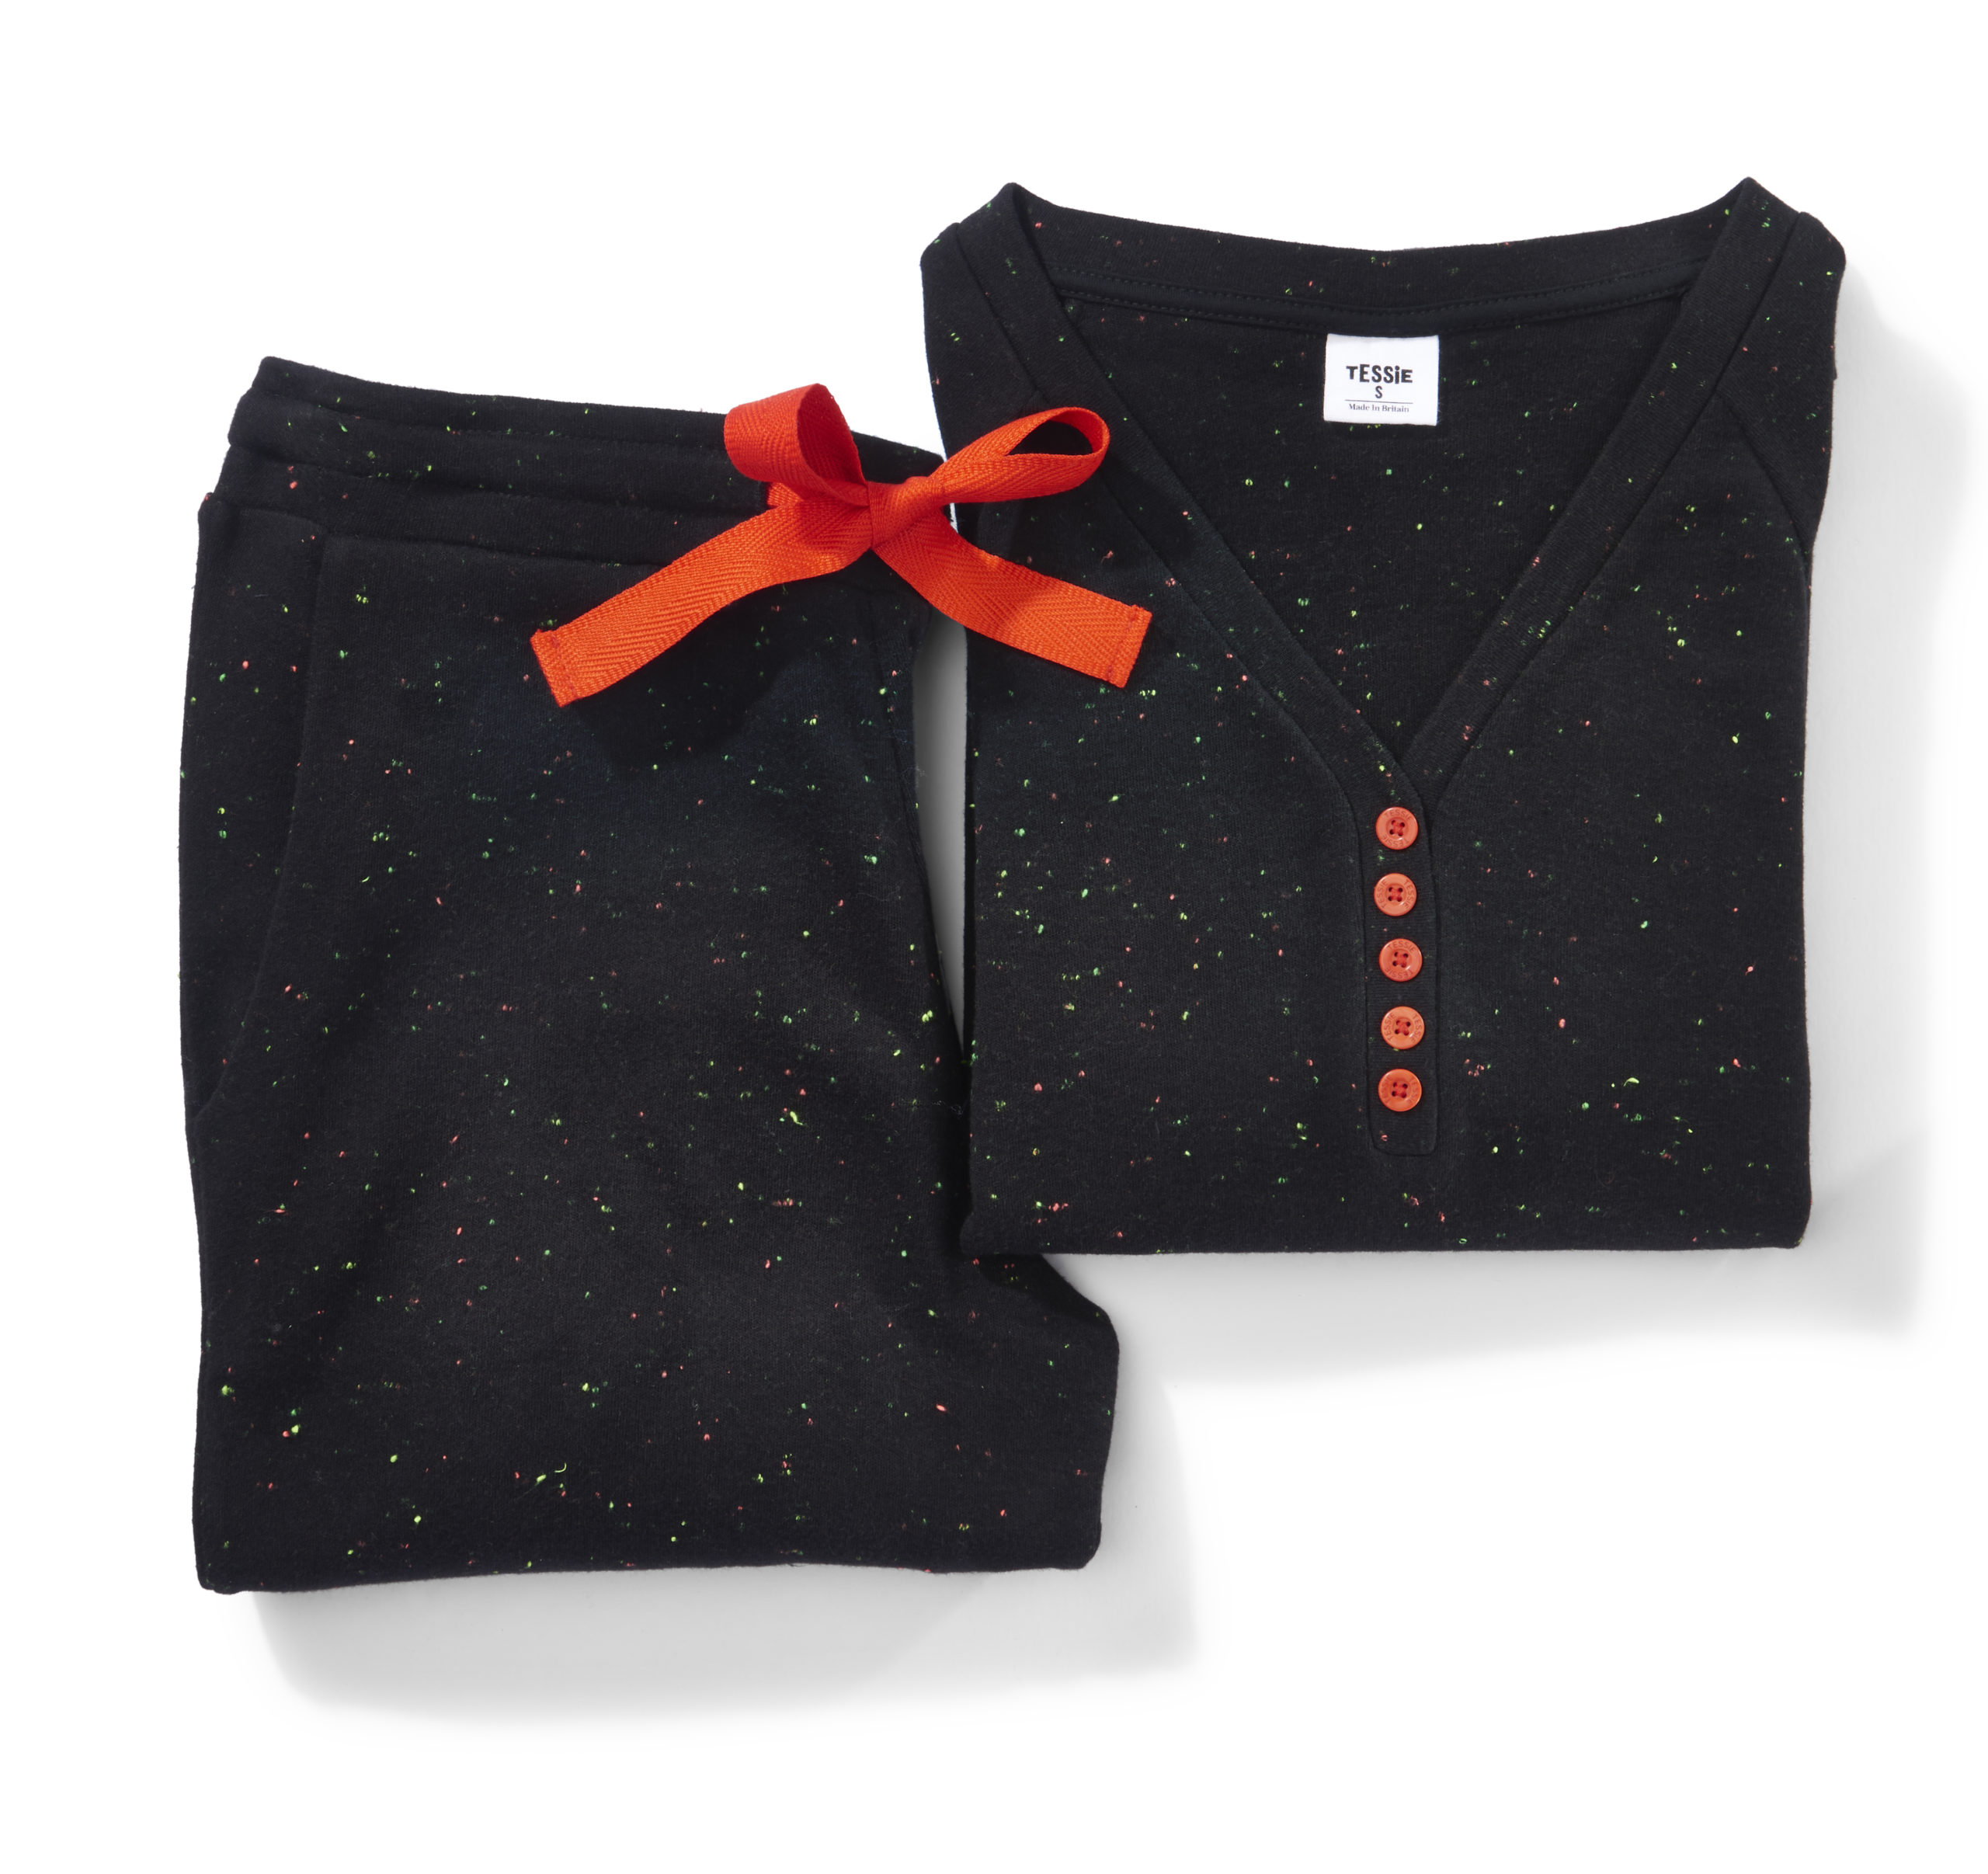 Tessie Clothing Confetti Black Long Sleeve Top & Trousers Set